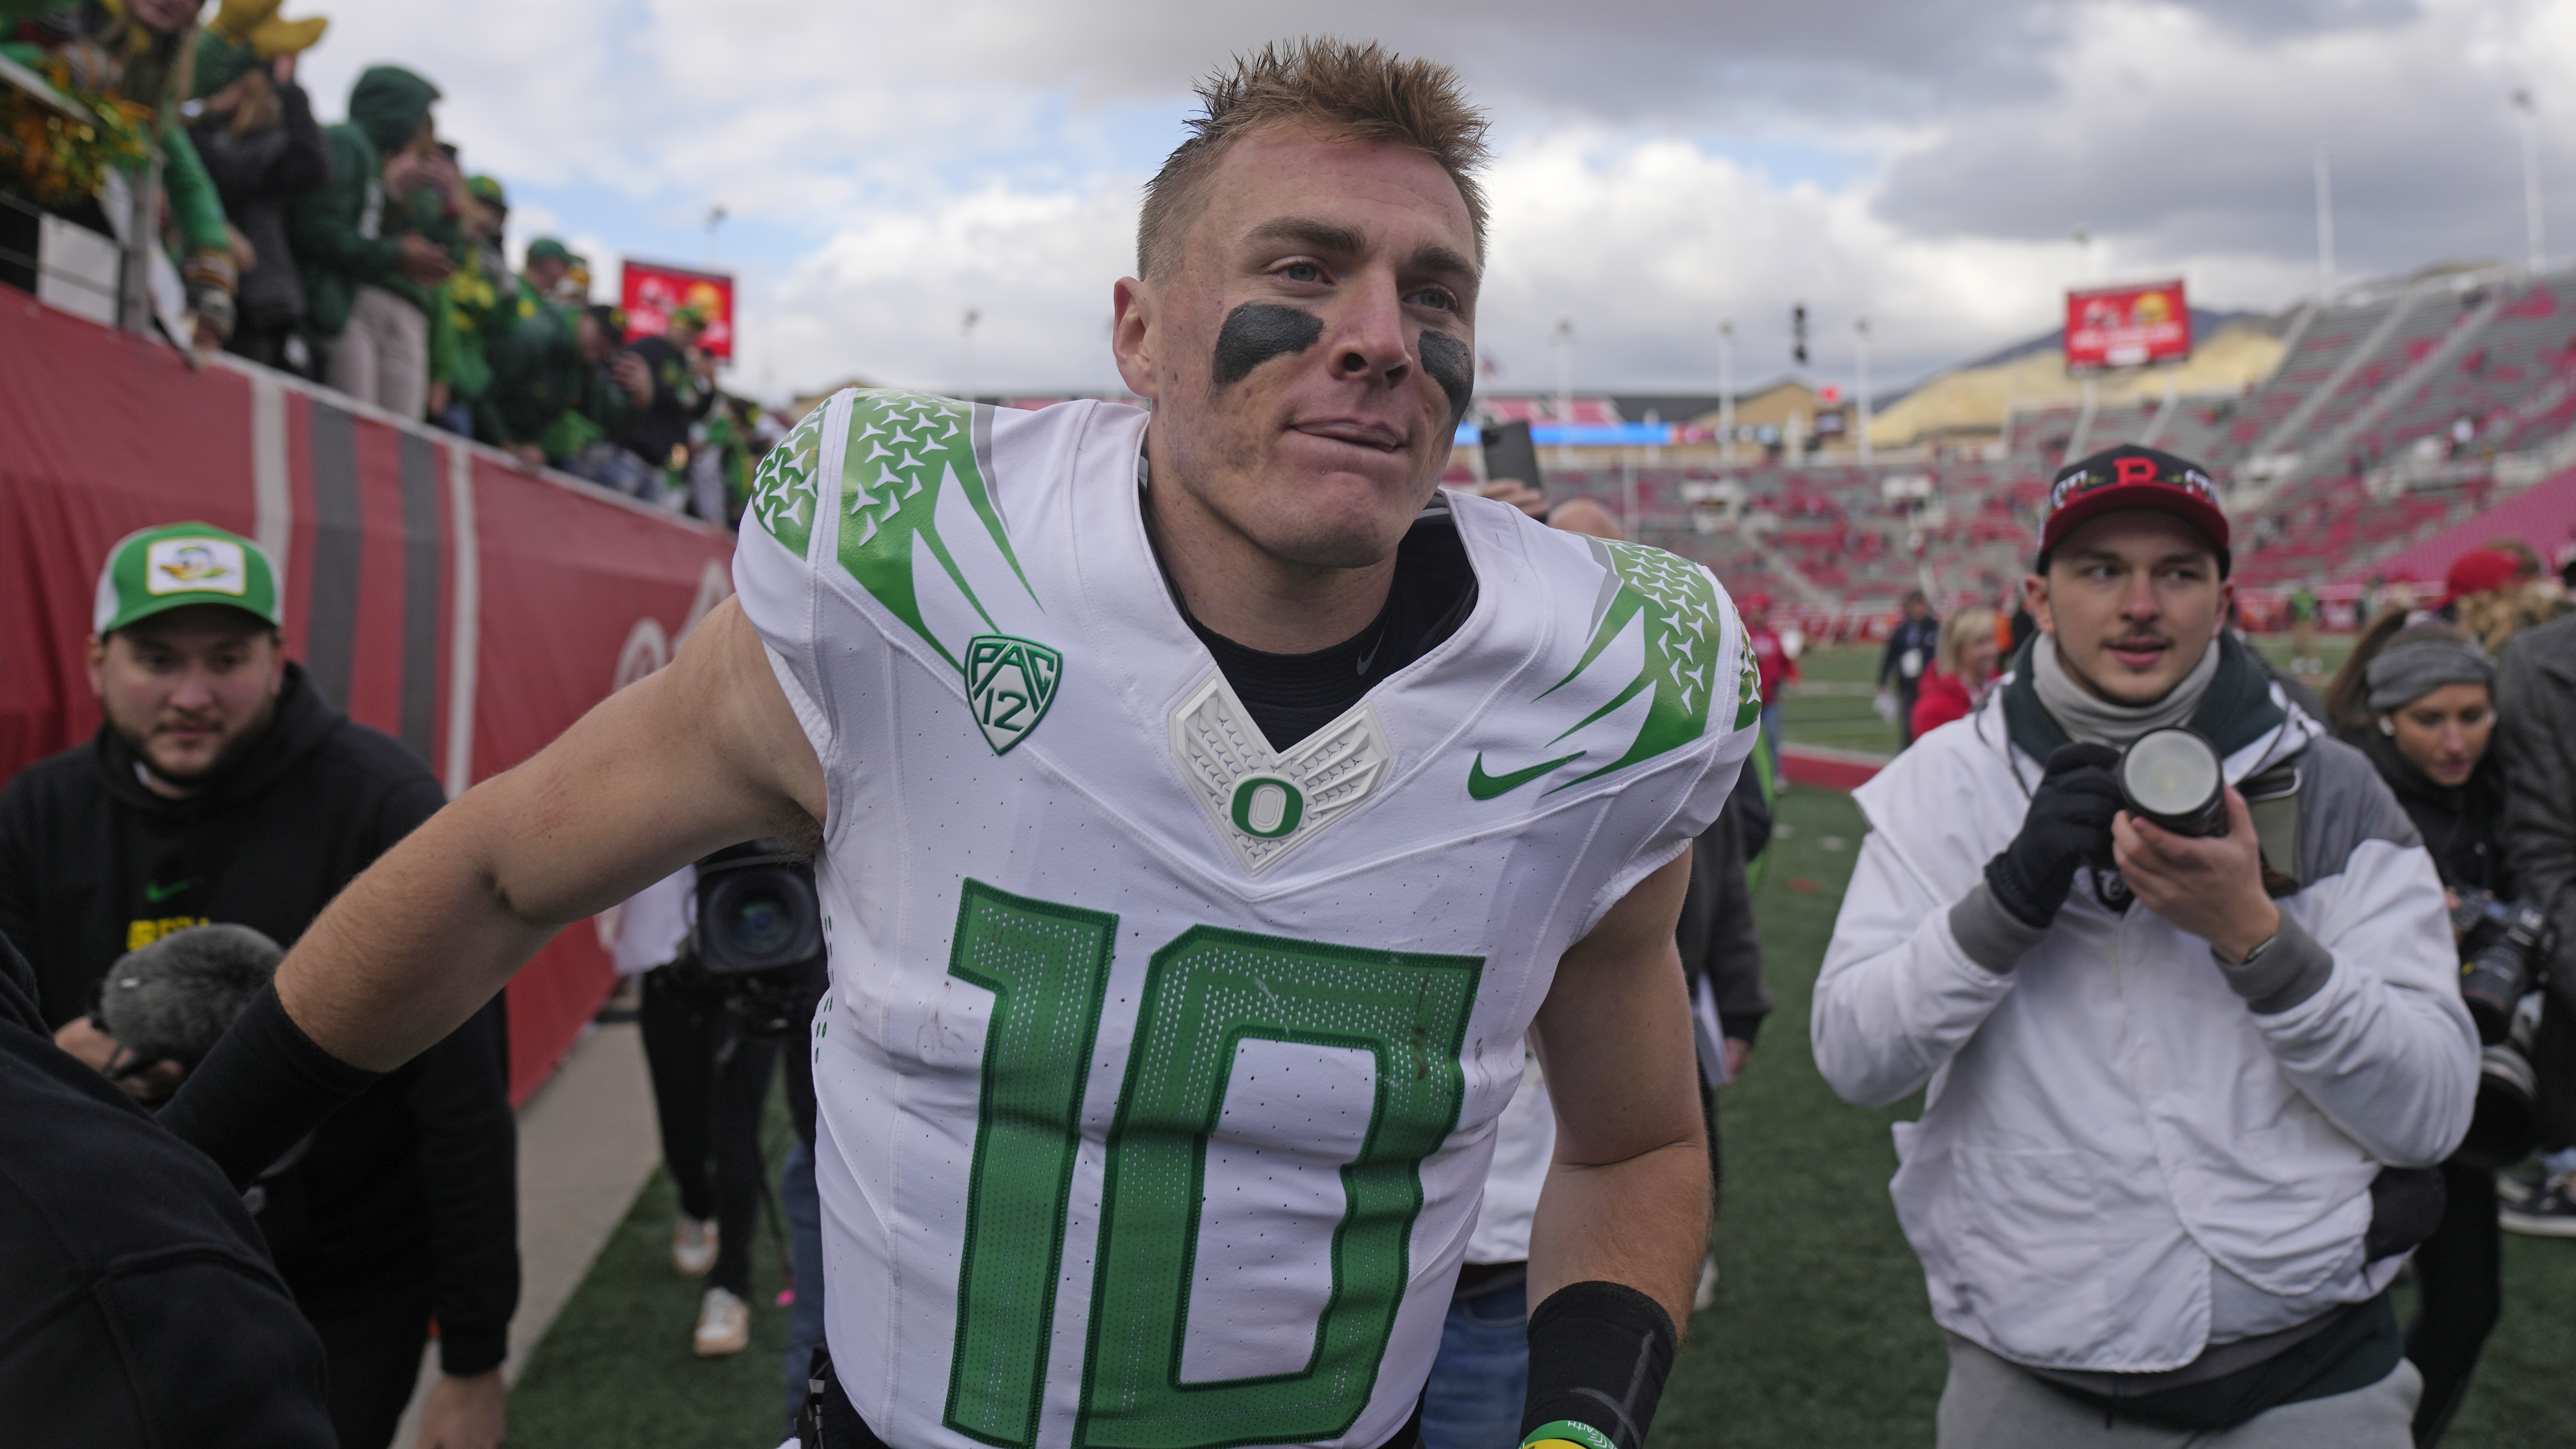 Bo Nix throws for 3 TDs as No. 15 Oregon dominates in 81-7 win